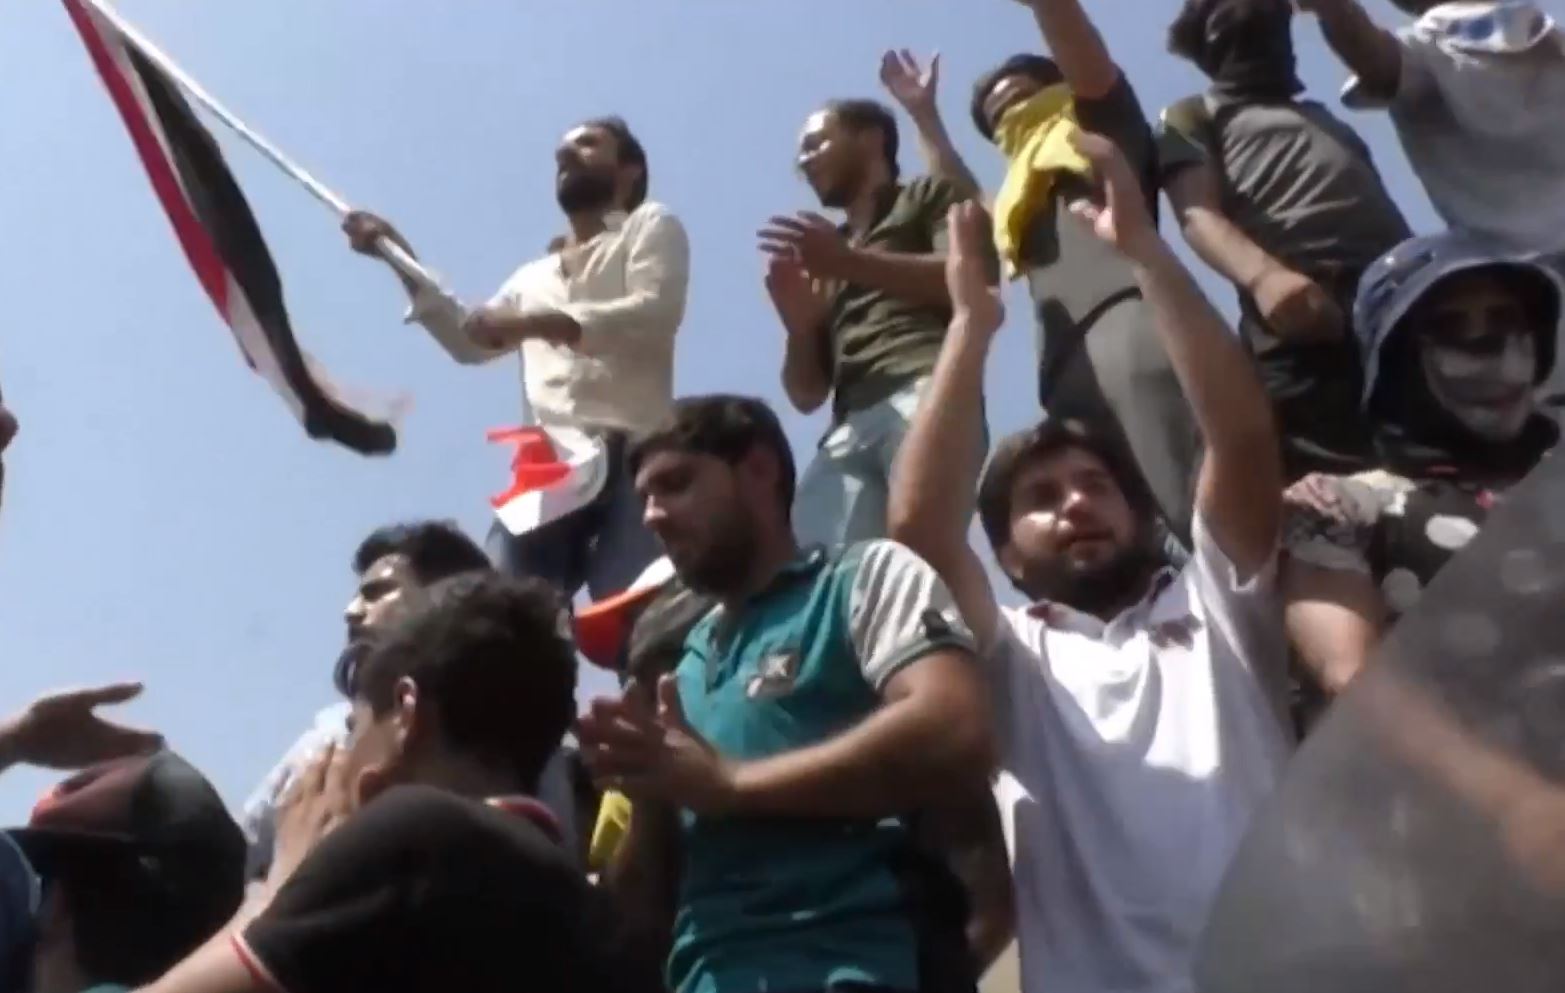 Iraq Protests: A Hot, Thirsty, and Angry Iraq is One Glimpse into the Region’s Future